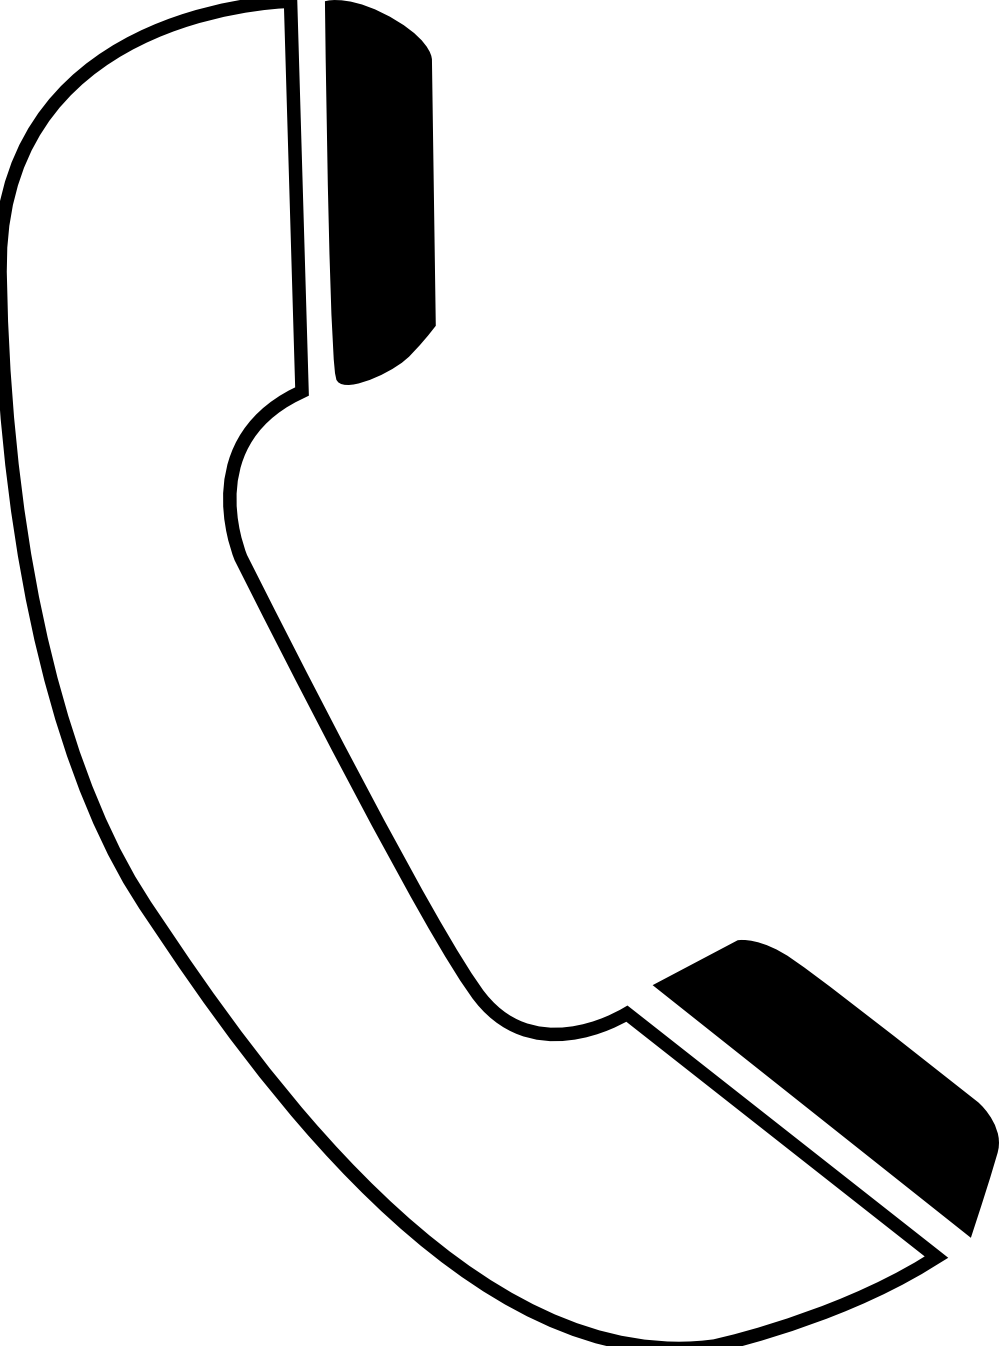 Clipart phone black and white, Clipart phone black and white ...